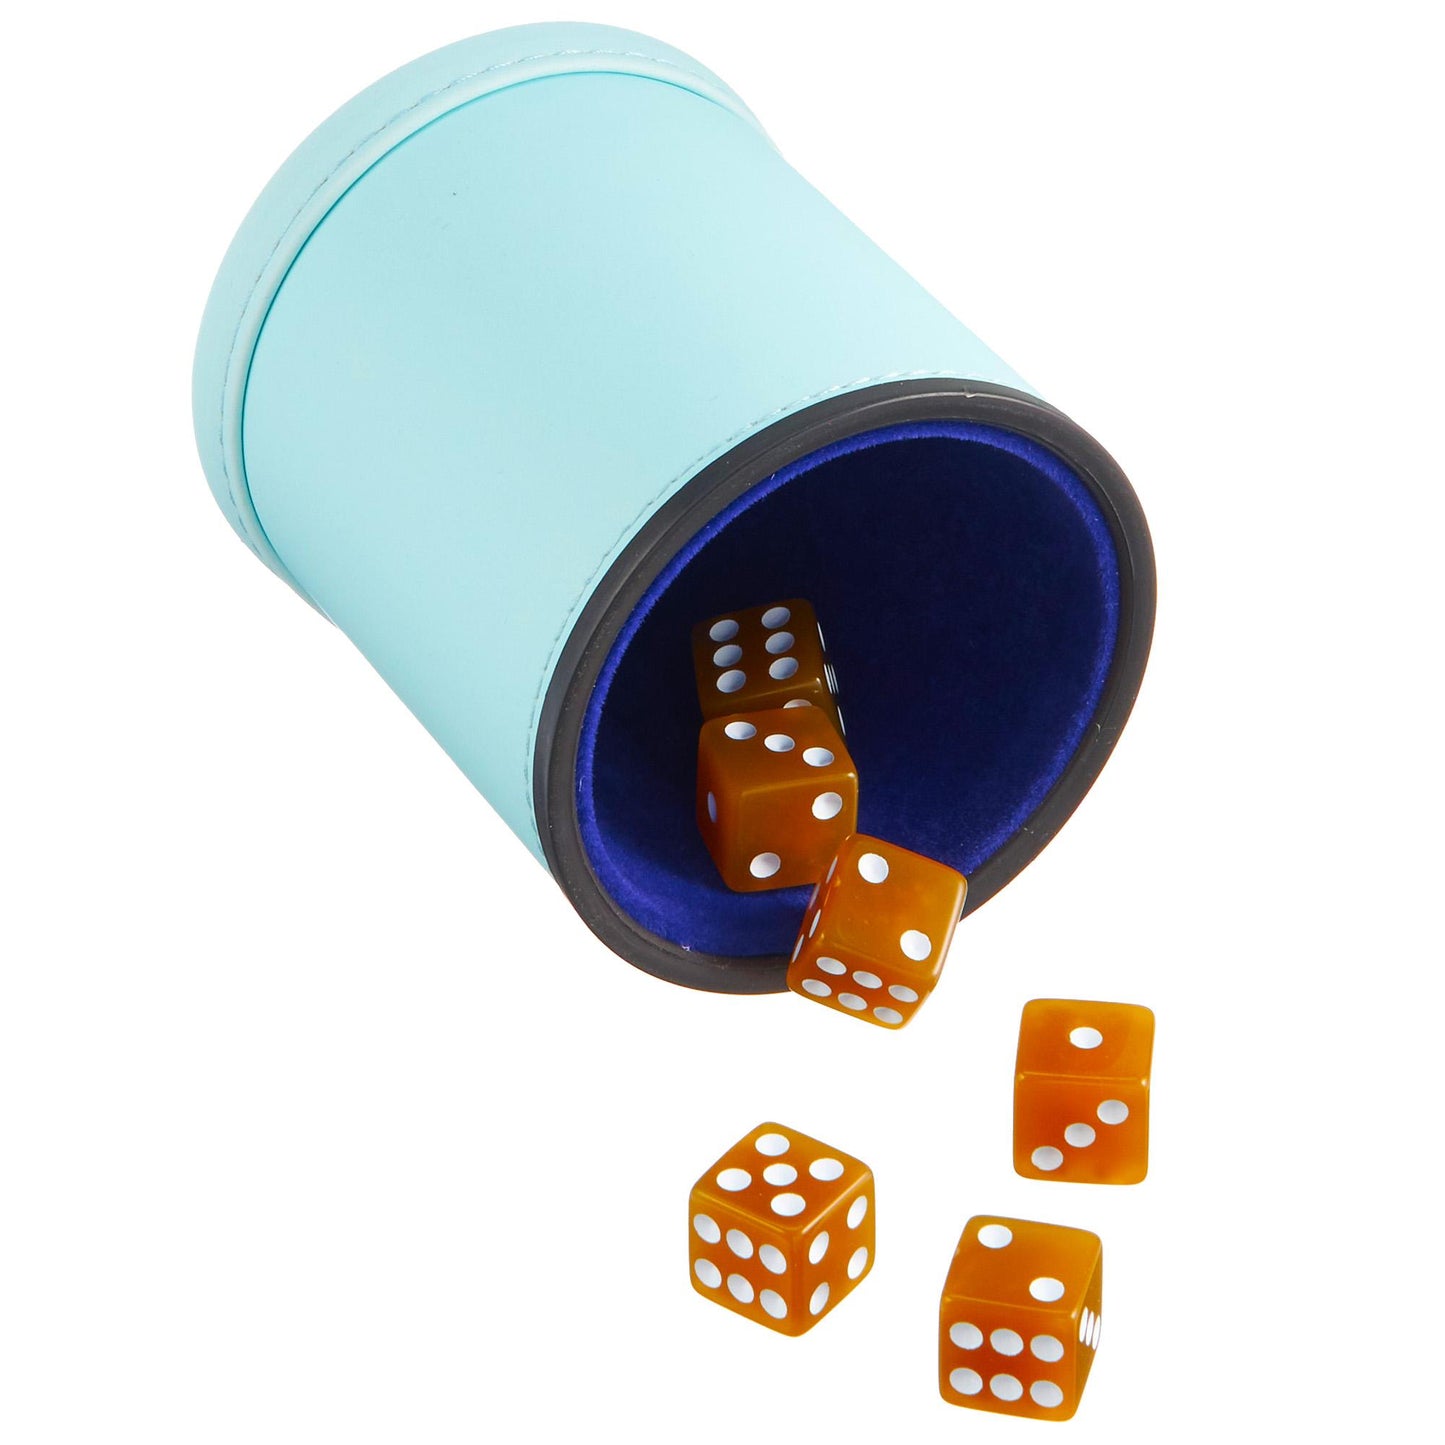 Glow in the Dark Dice Cup with 5 Glow Dice